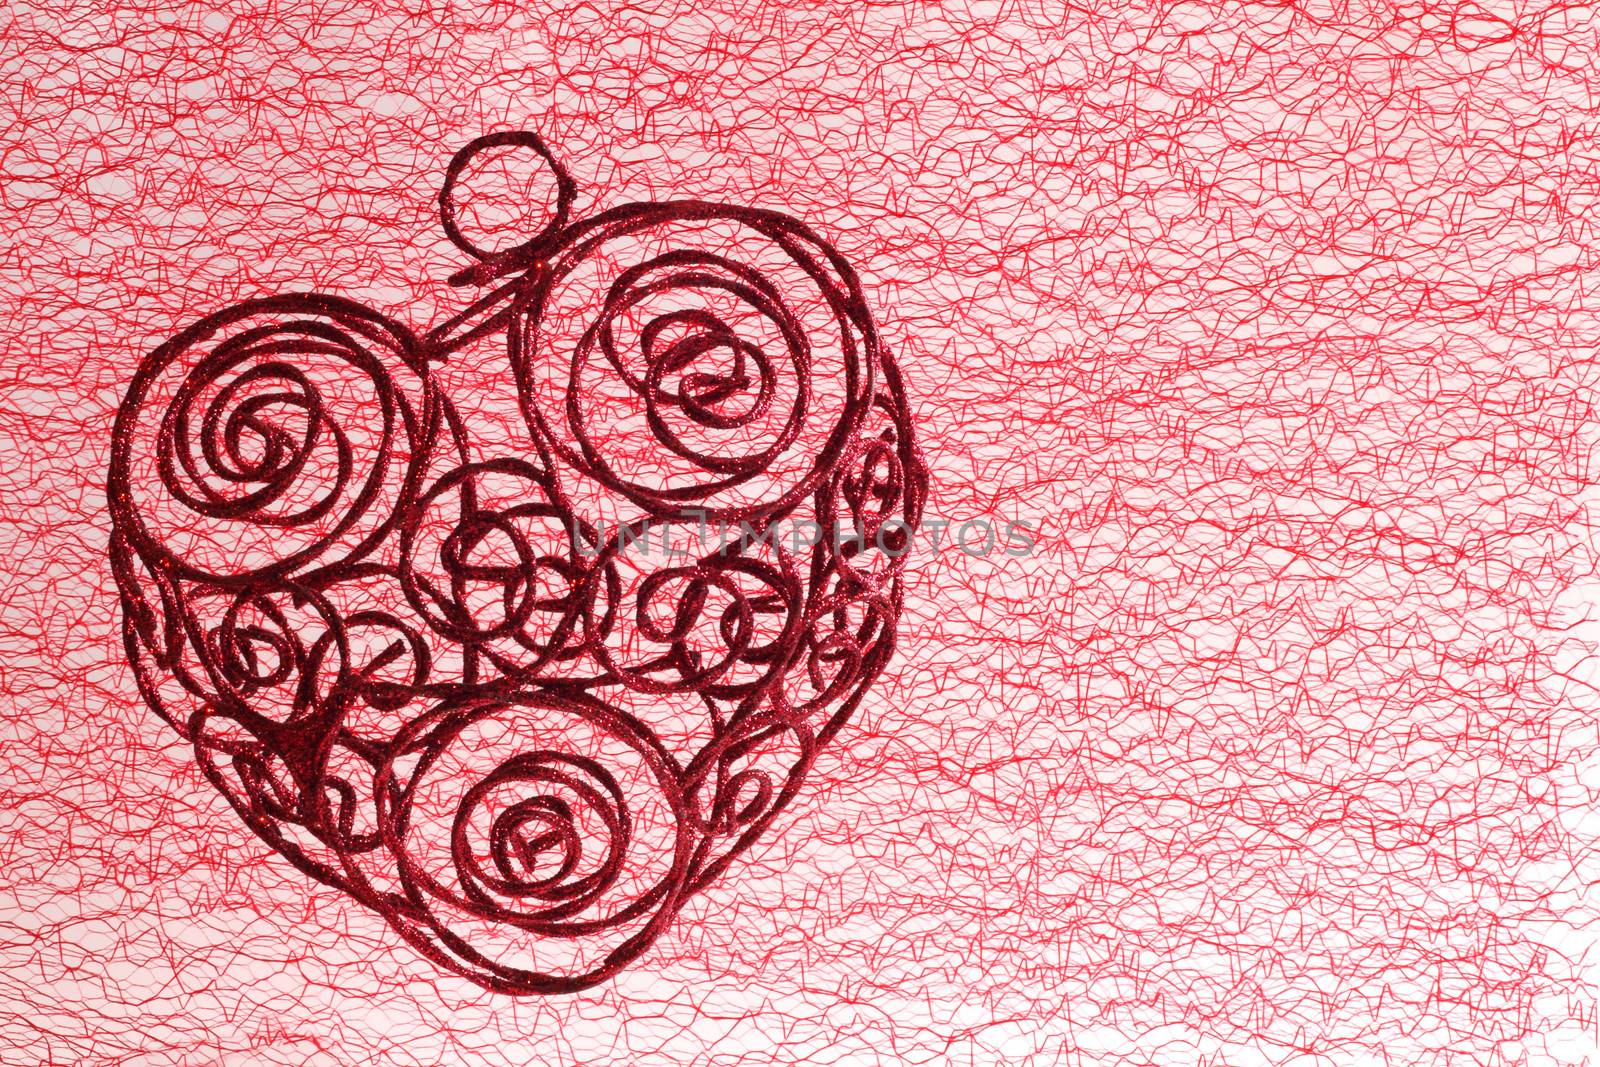 Valentines day heart over textile background with copy space